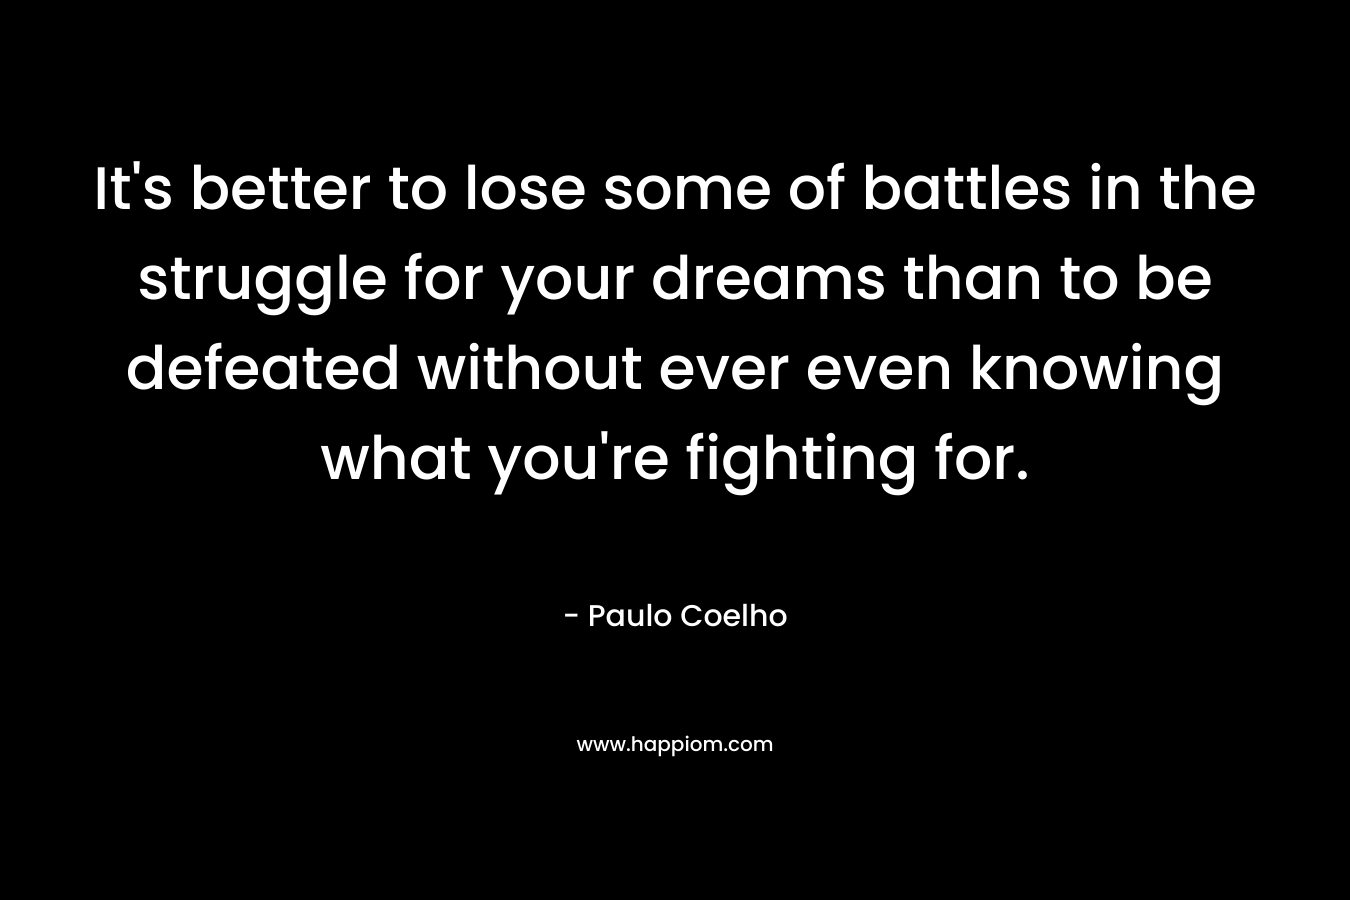 It's better to lose some of battles in the struggle for your dreams than to be defeated without ever even knowing what you're fighting for.